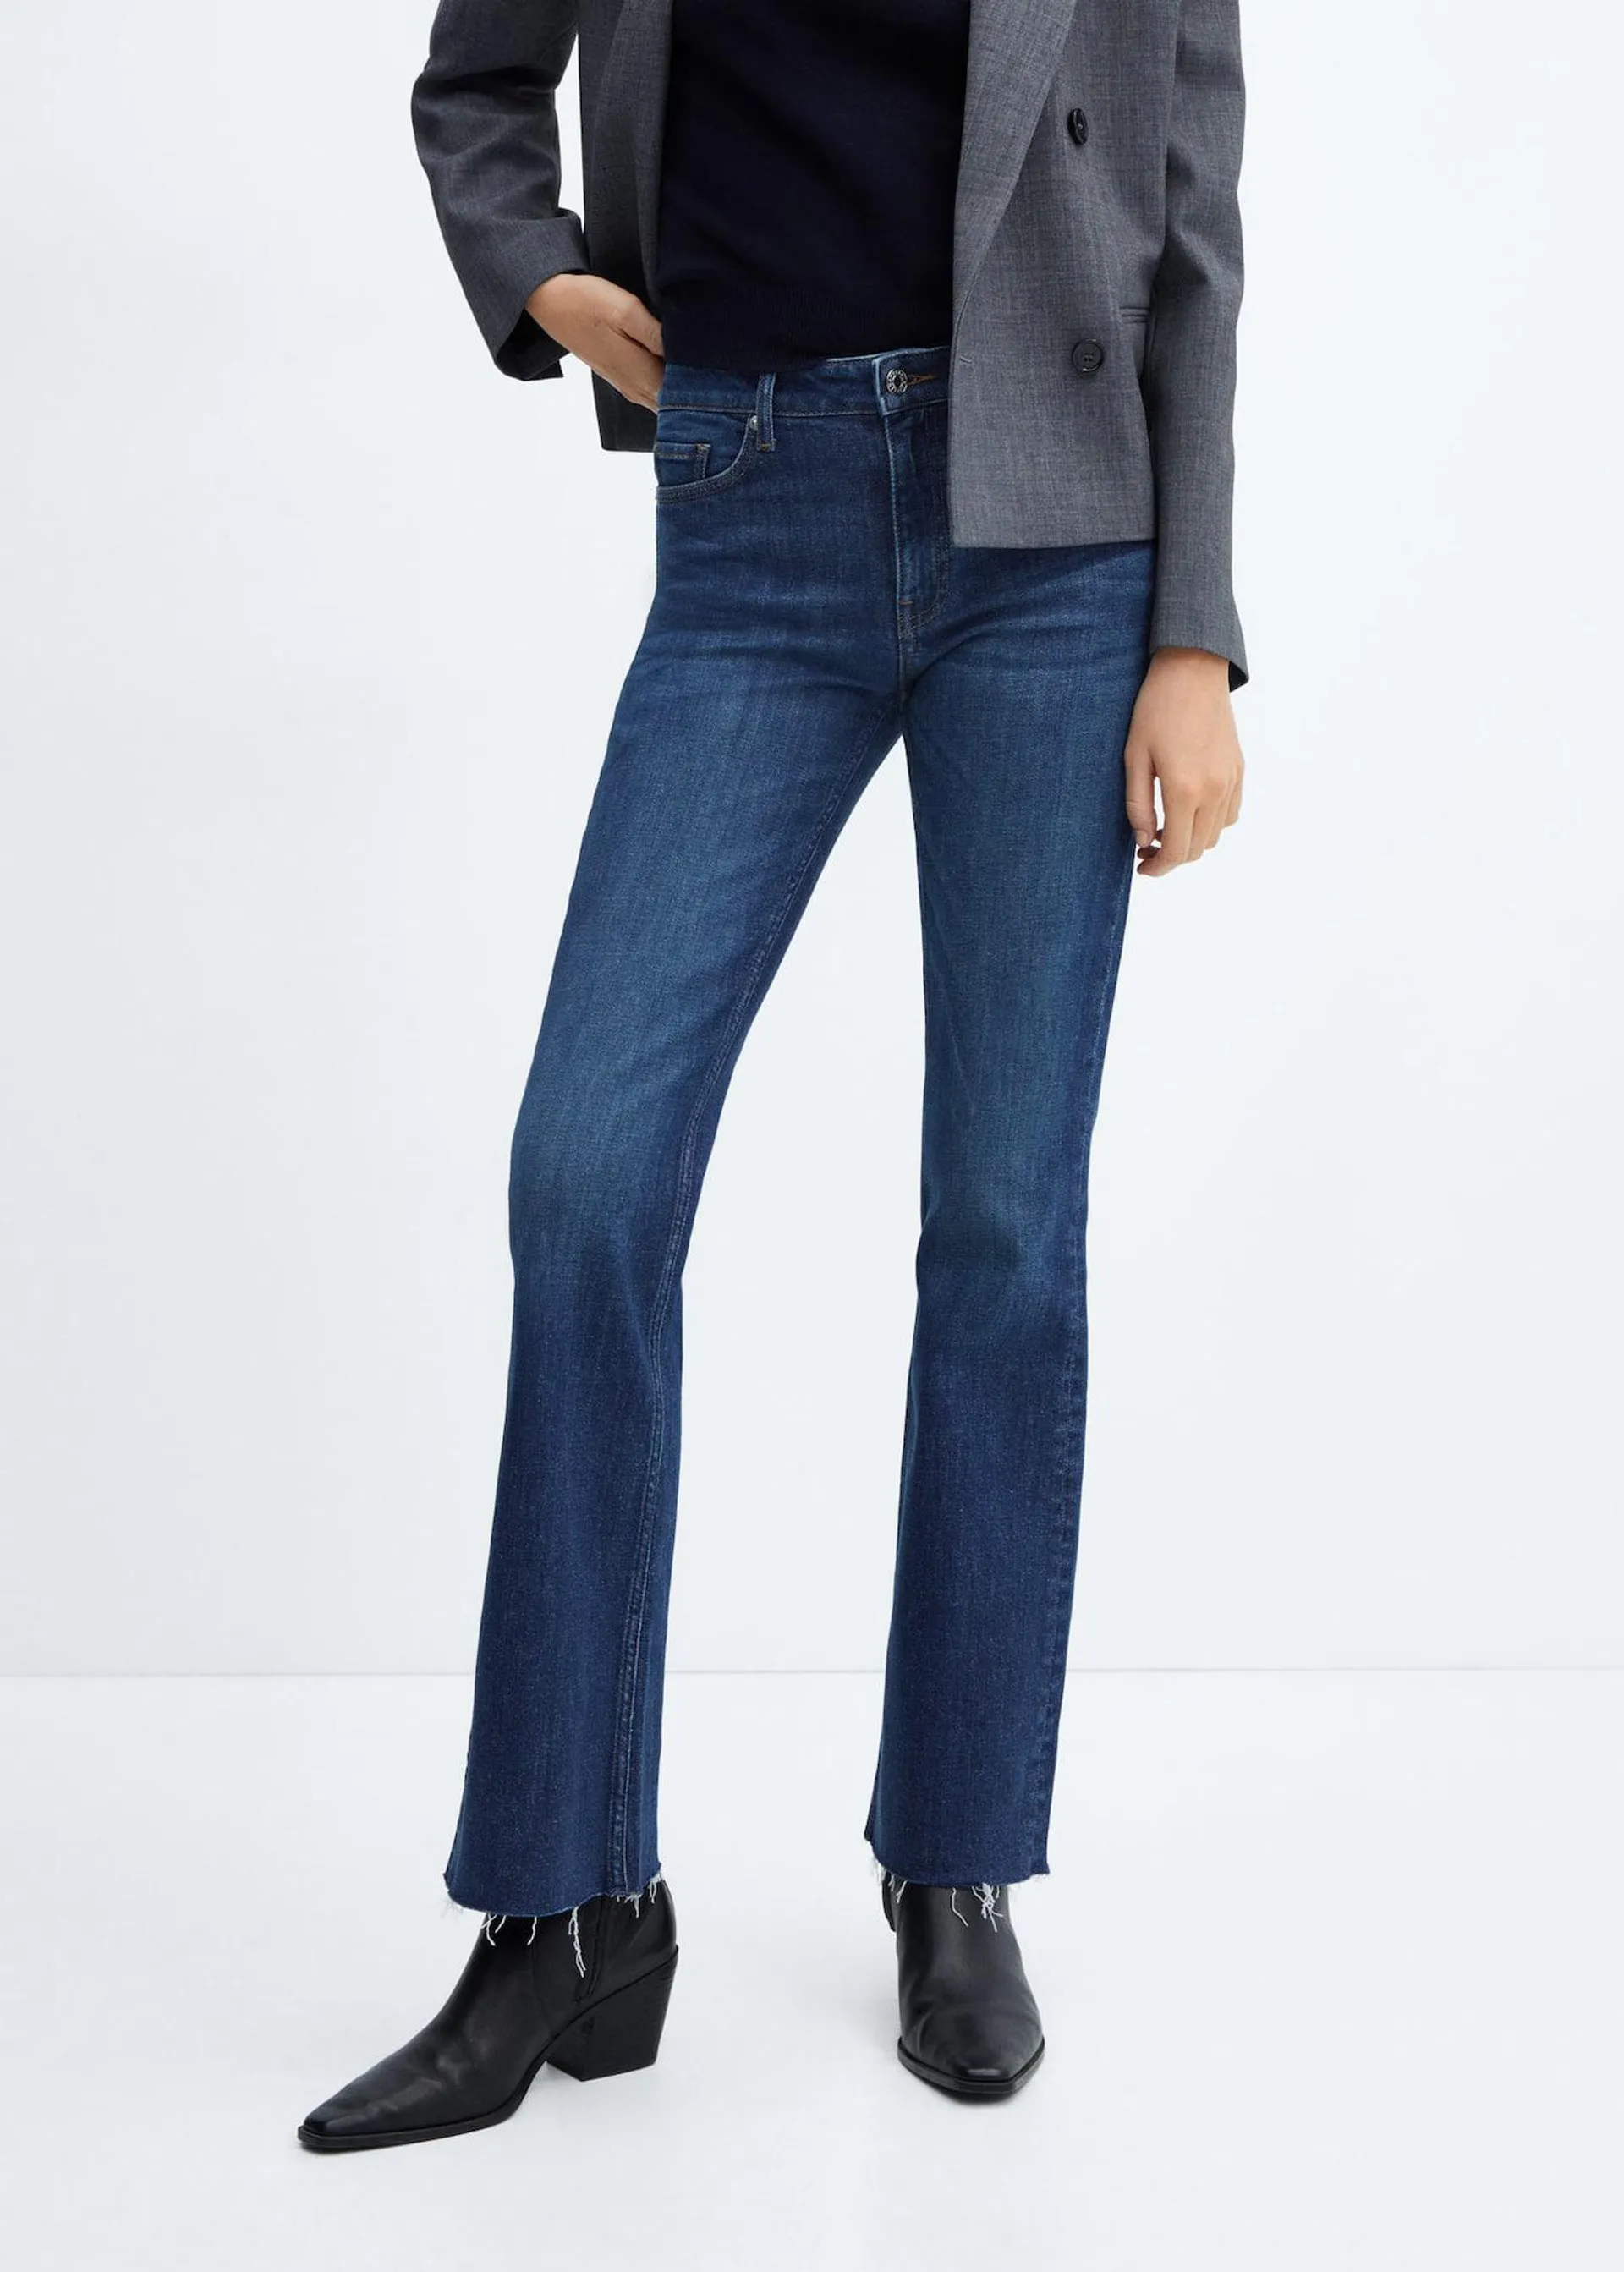 Flared mid-rise jeans